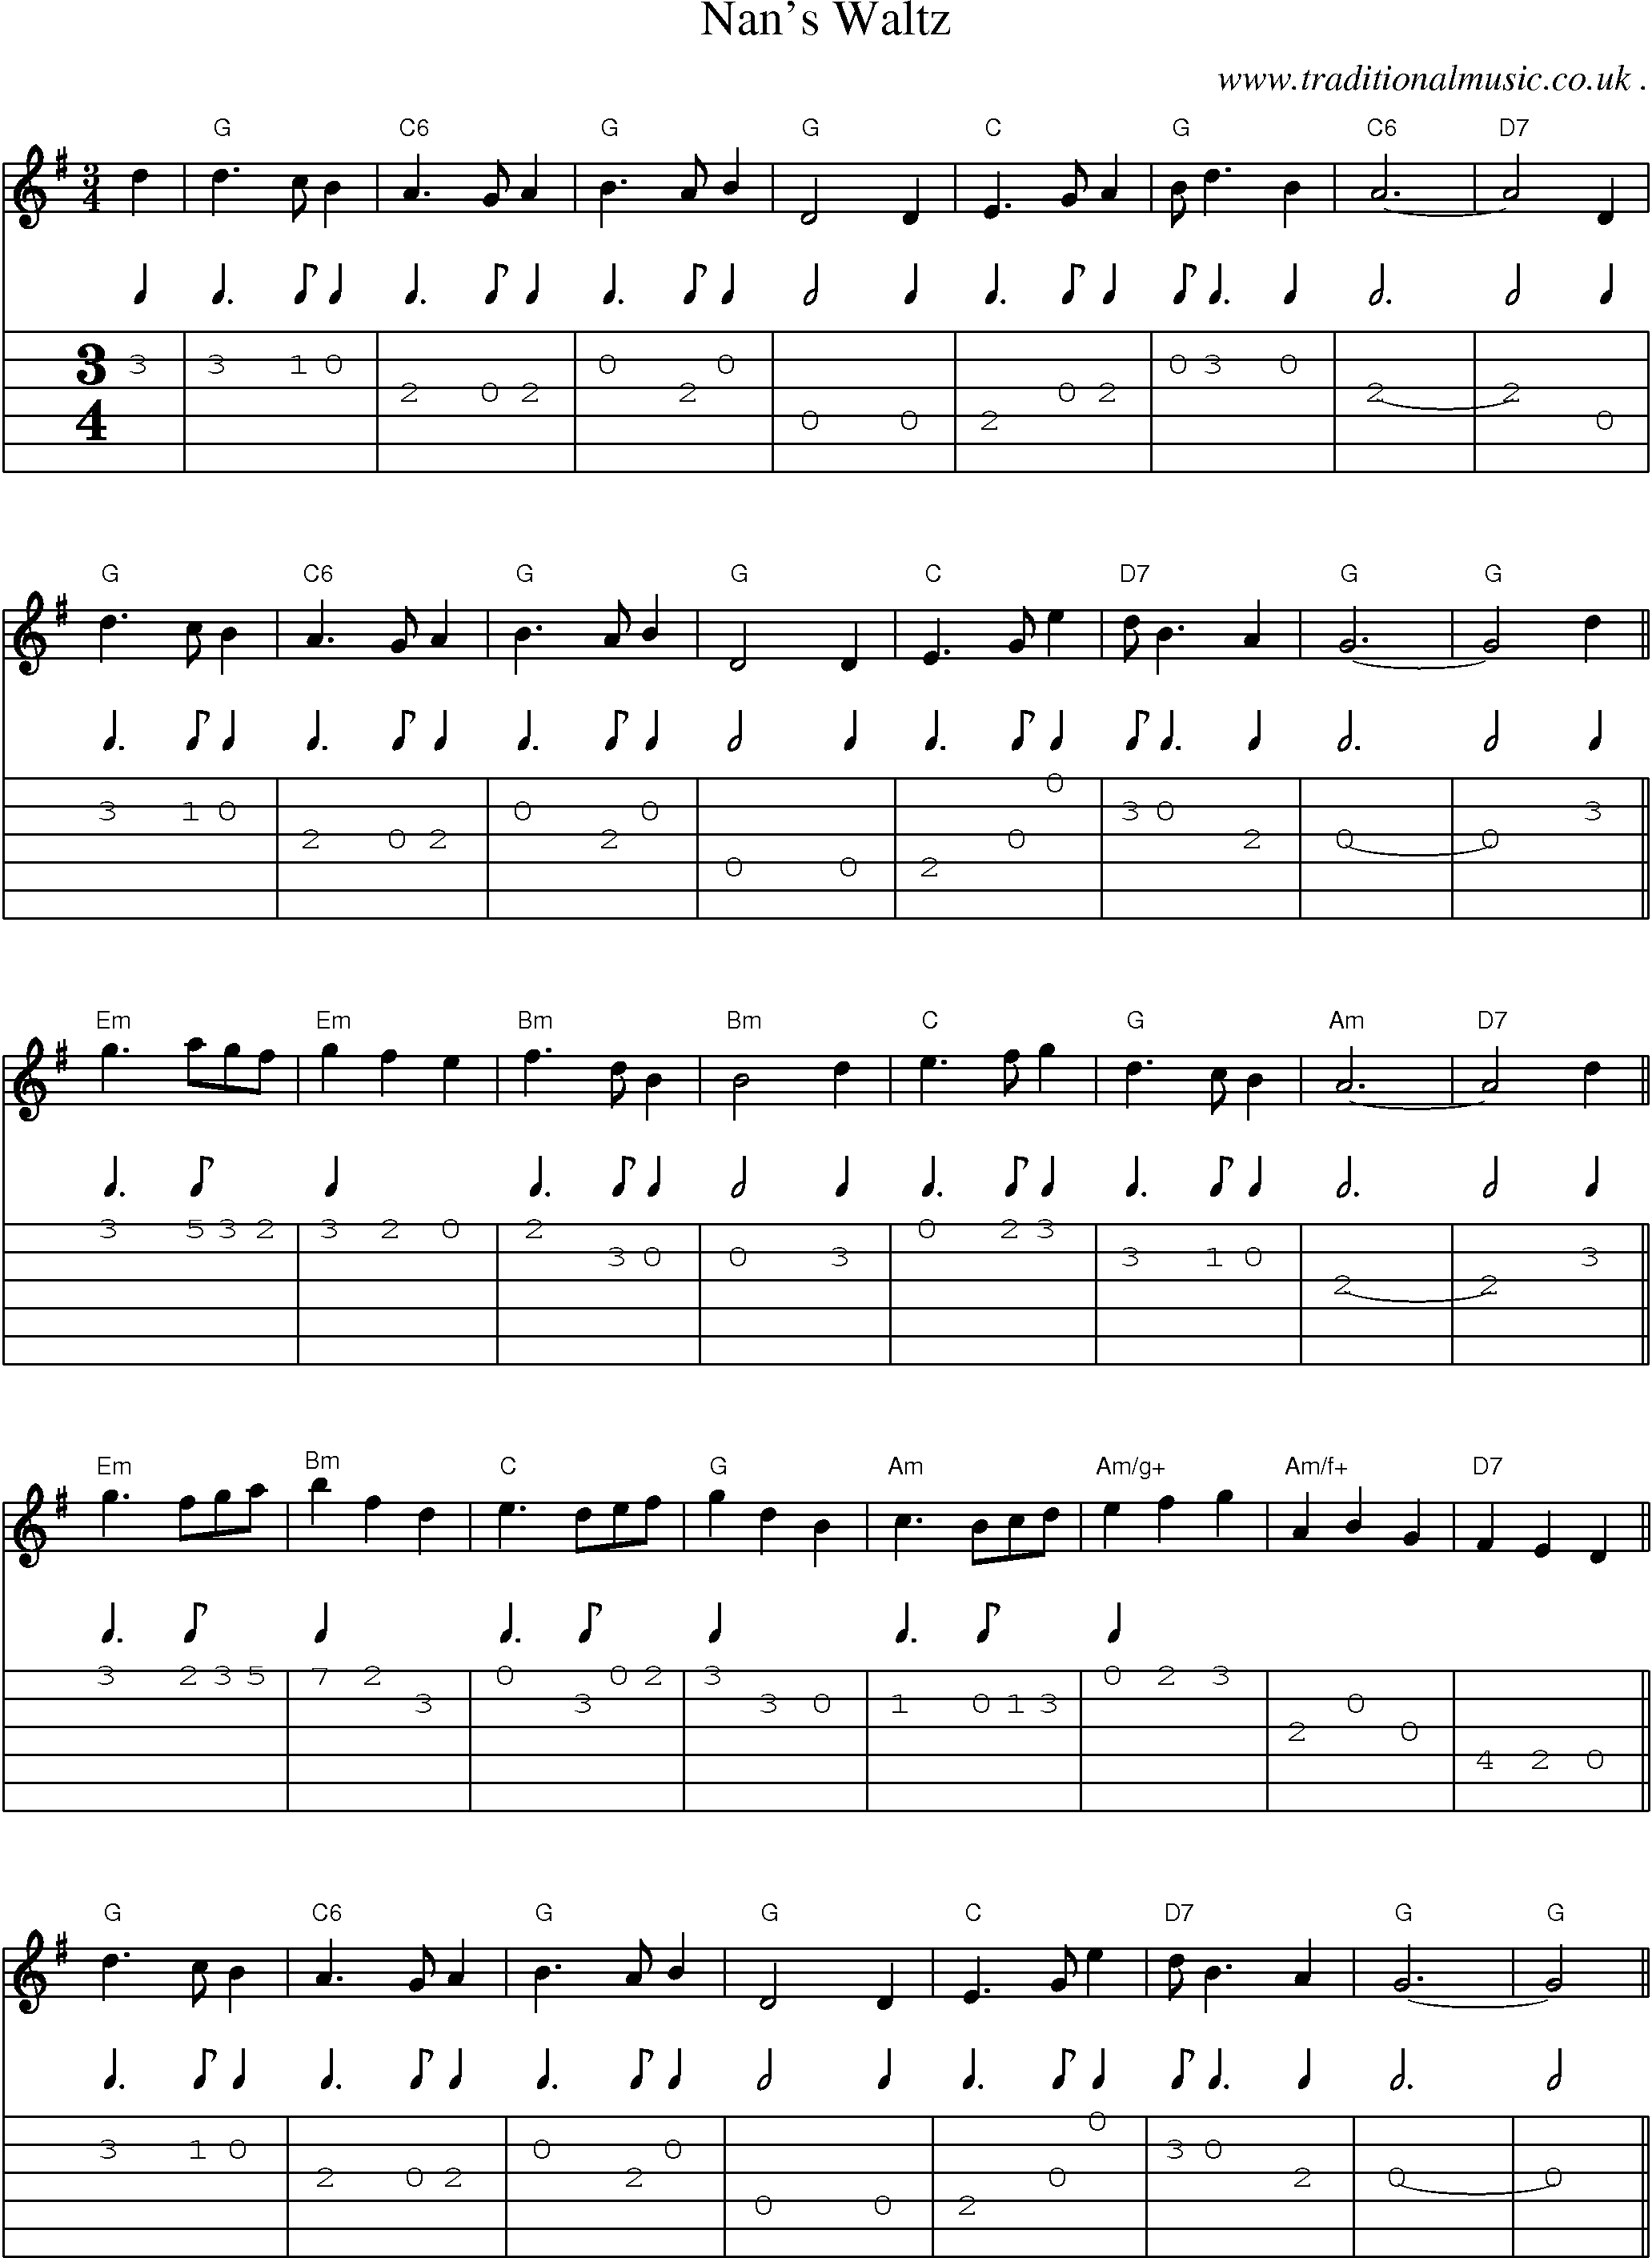 Sheet-Music and Guitar Tabs for Nans Waltz